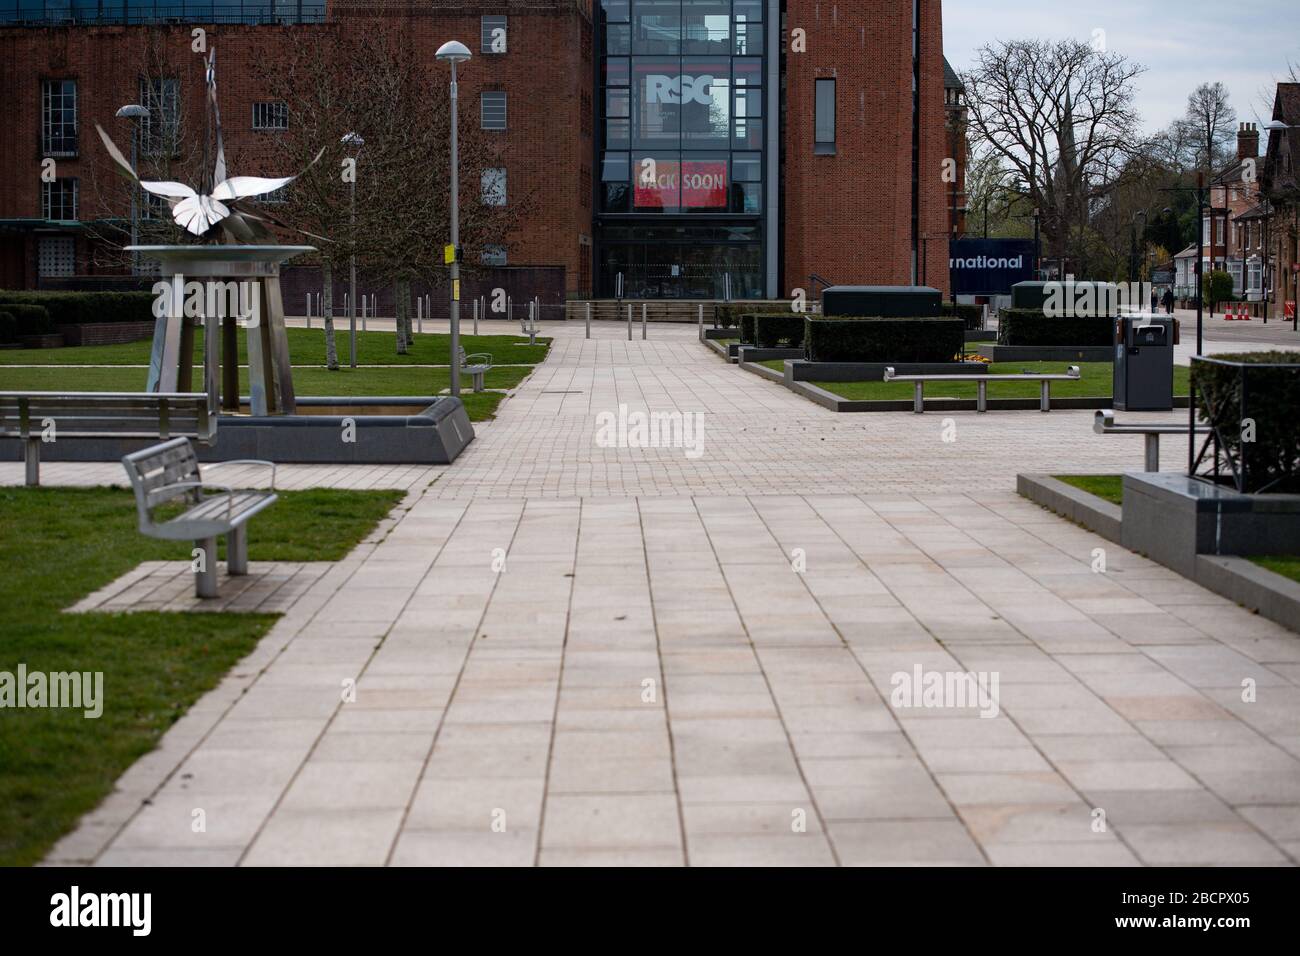 A near-deserted Bancroft Gardens as the Royal Shakespeare Theatre displays a 'Back Soon' message, in Stratford-upon-Avon in Warwickshire, as the UK continues in lockdown to help curb the spread of the coronavirus. Stock Photo